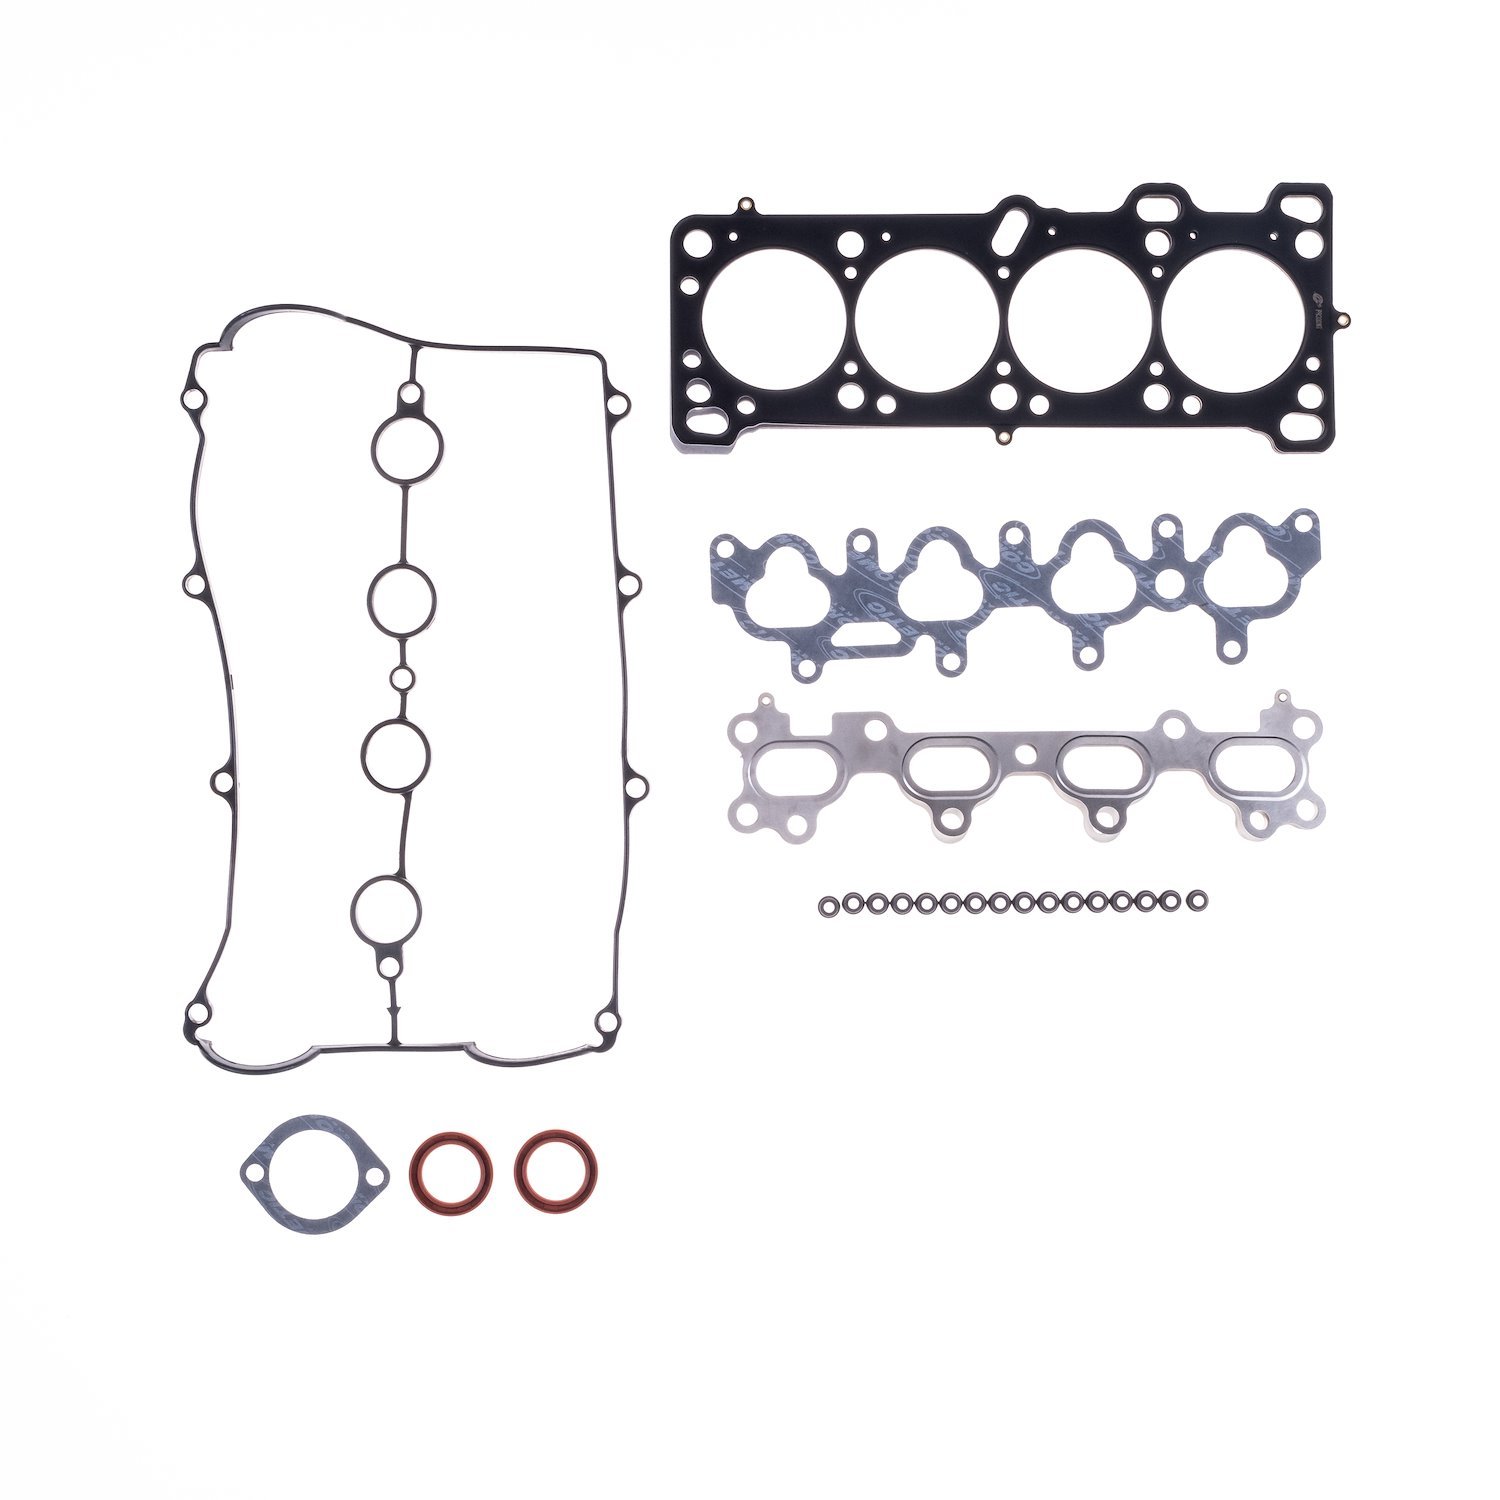 Top End Street Pro Gasket Kit for Select 1990-1993 Mazda Miata, MX-3 with B6ZE Engine